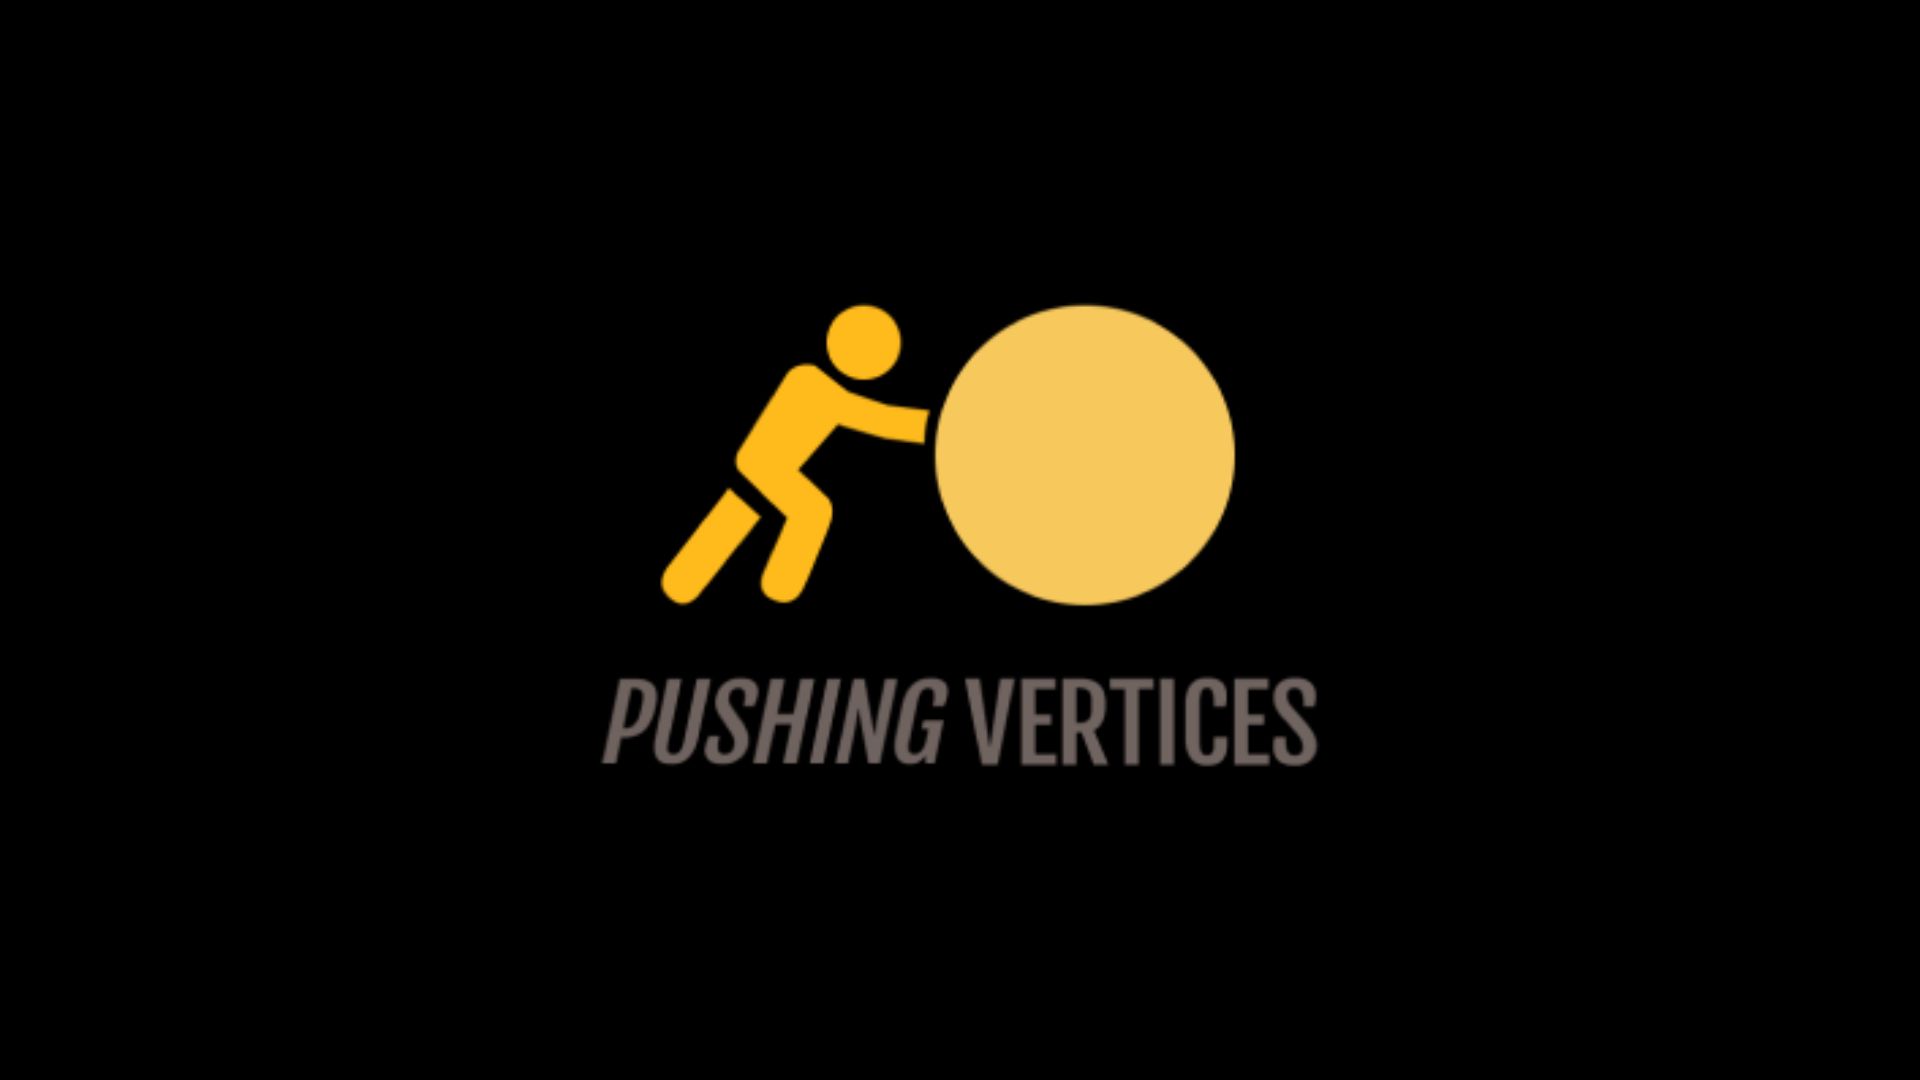 Pushing Vertices